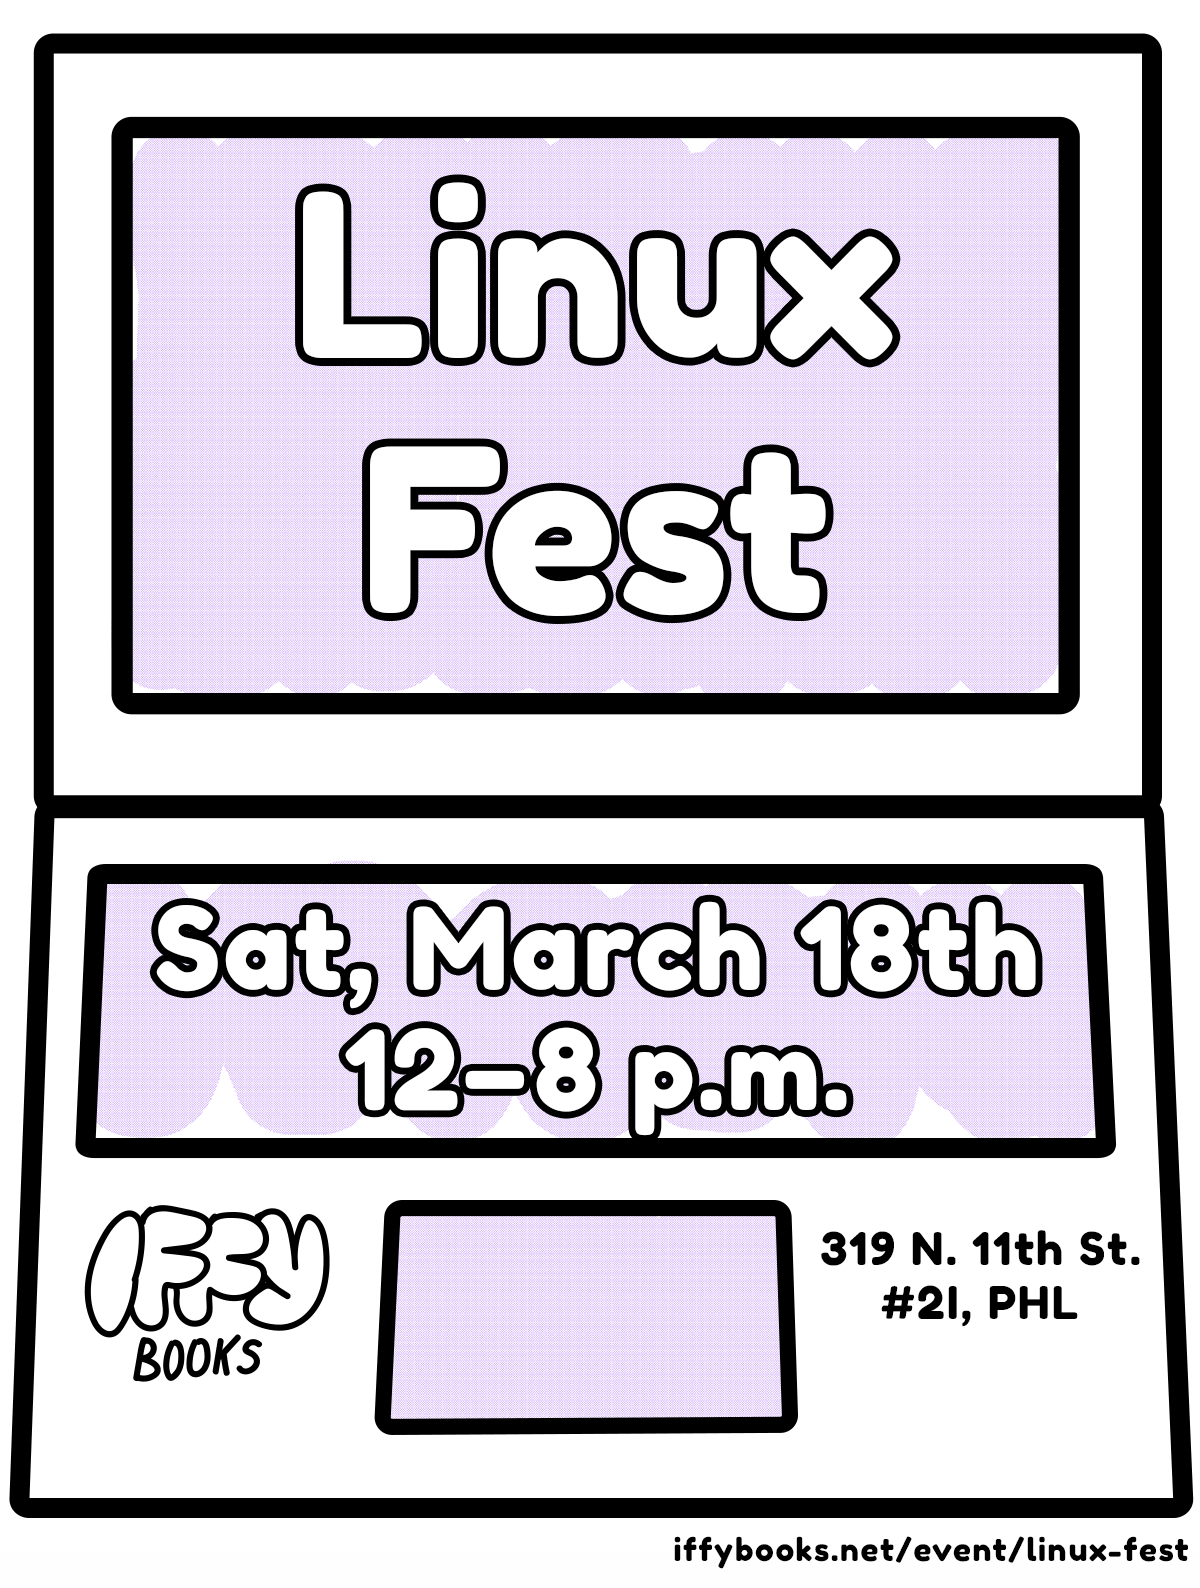 Flyer with a simplified illustration of a laptop and the following text: Linux Fest / Sat, March 18th / 12-8 p.m. / Iffy Books / 319 N. 11th St. #2I, PHL / iffybooks.net/event/linux-fest